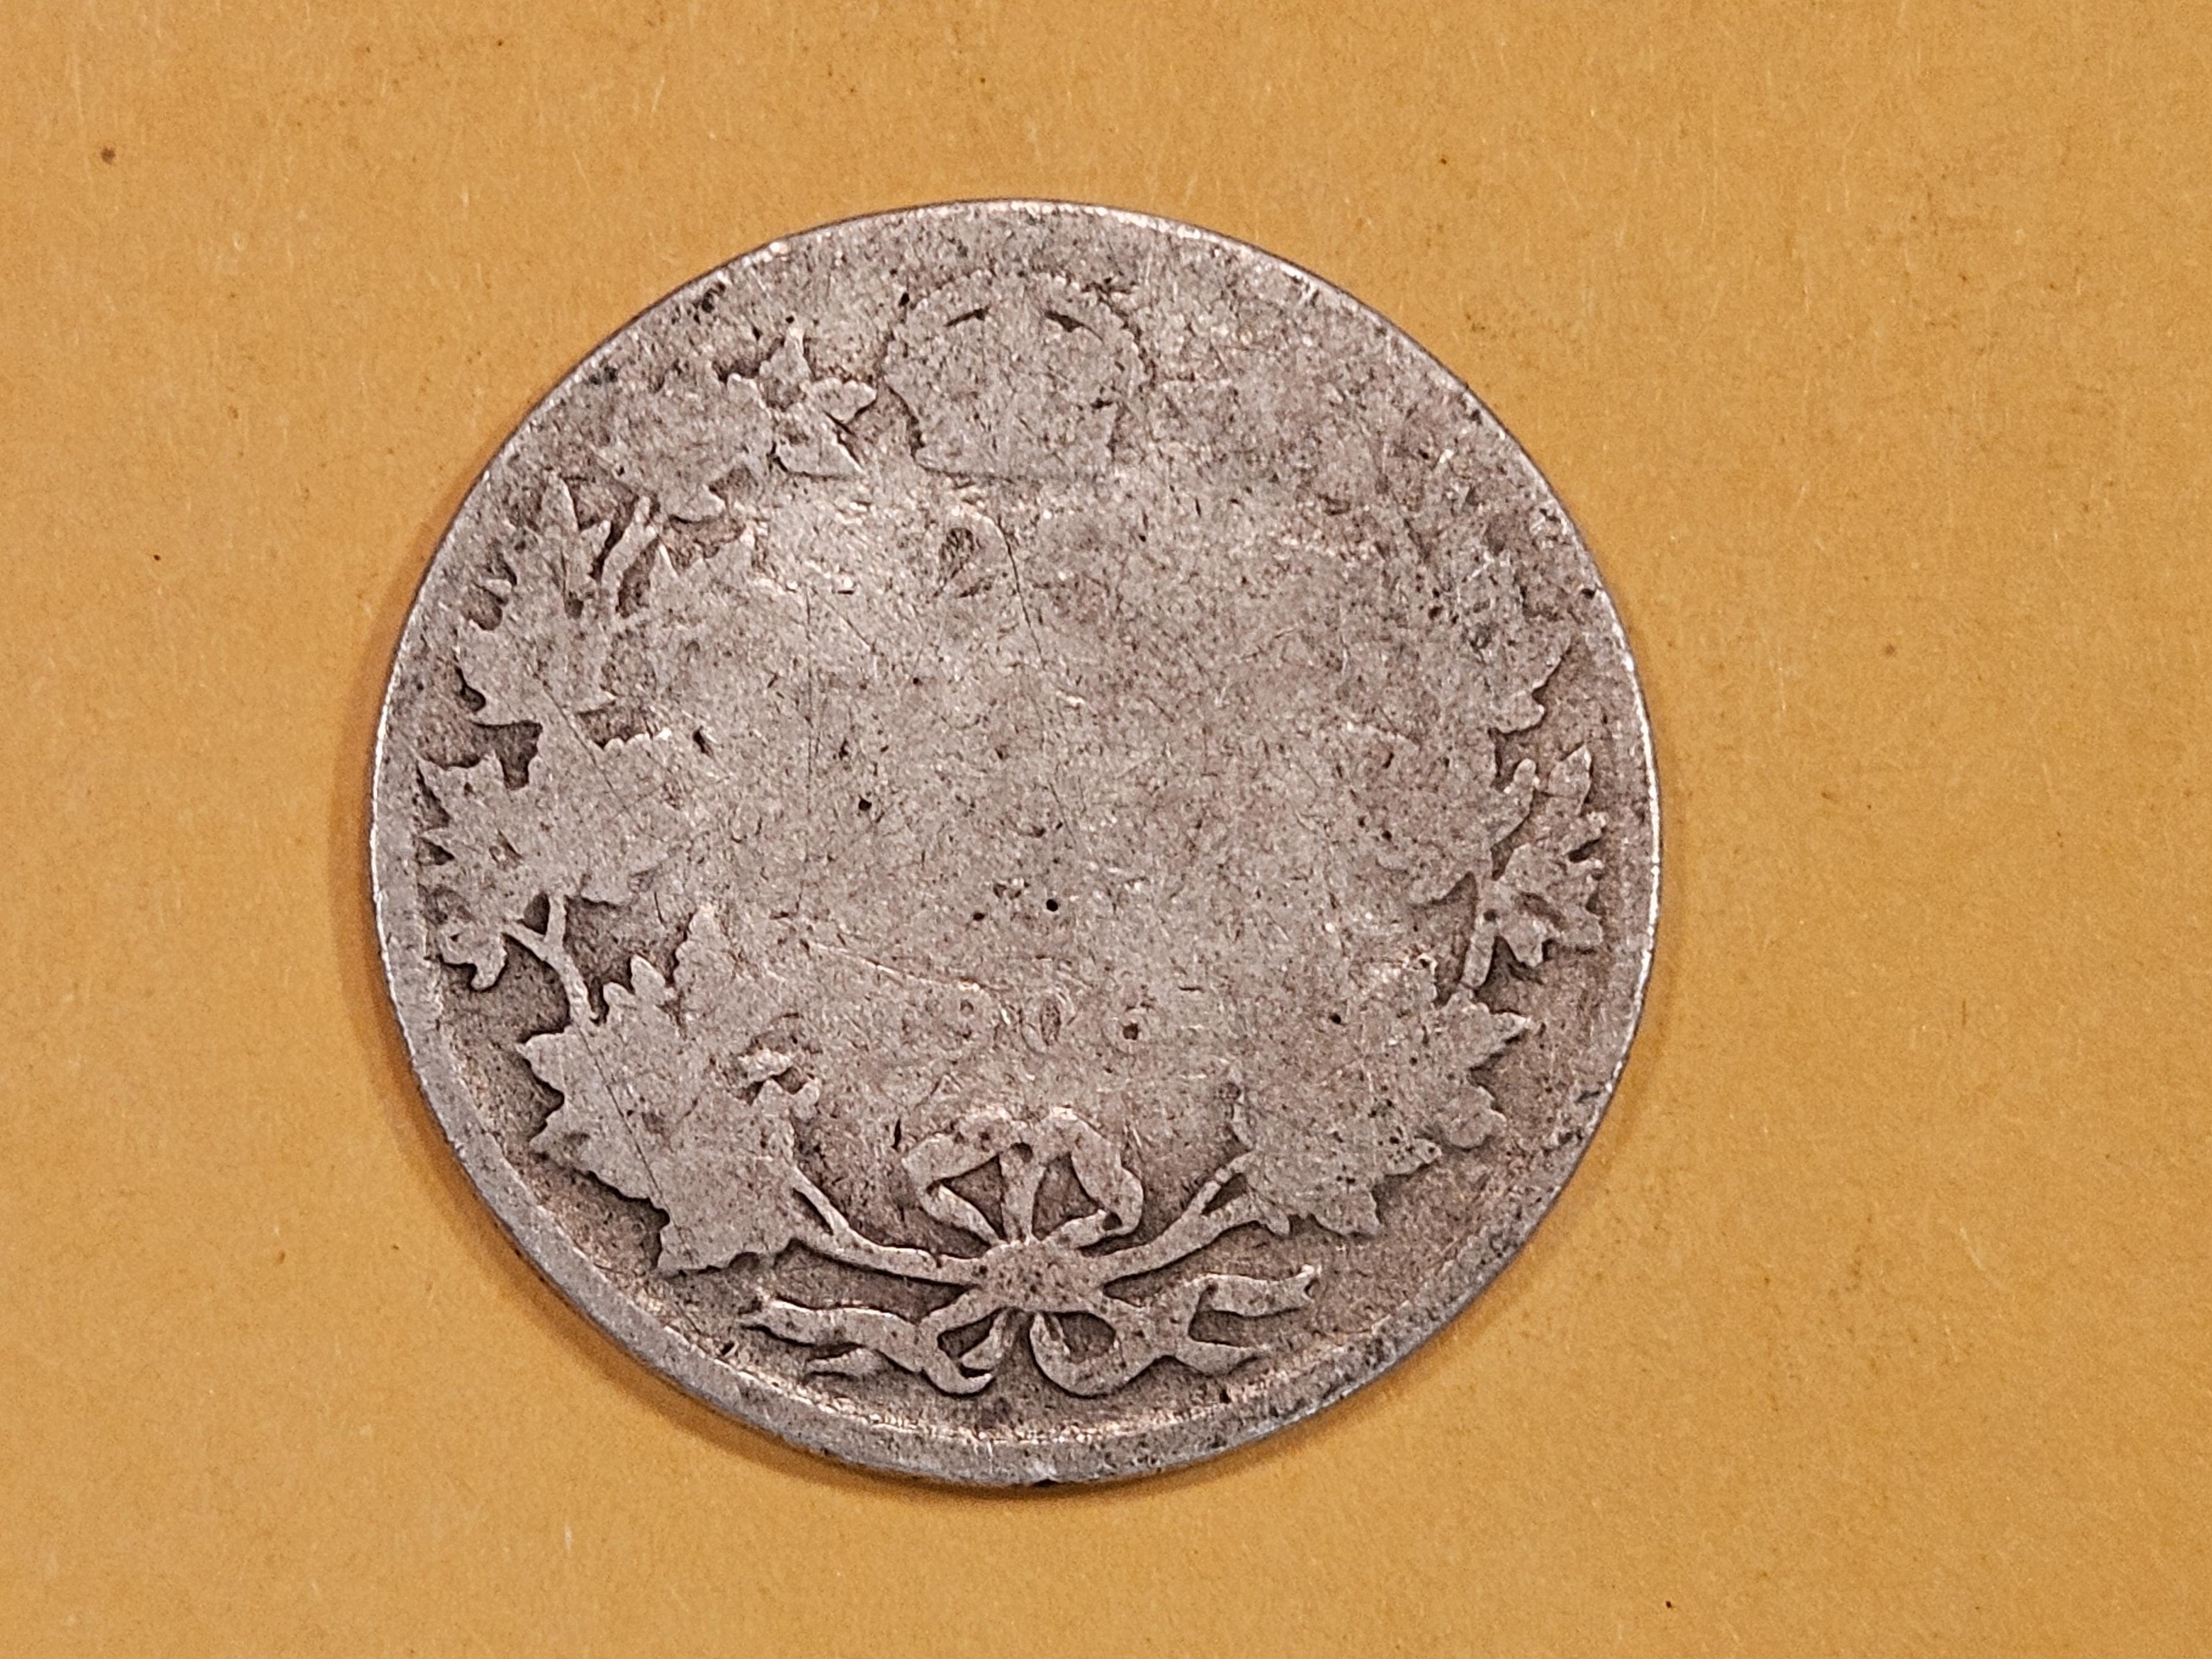 Better Date 1906 Canada silver 25 cents